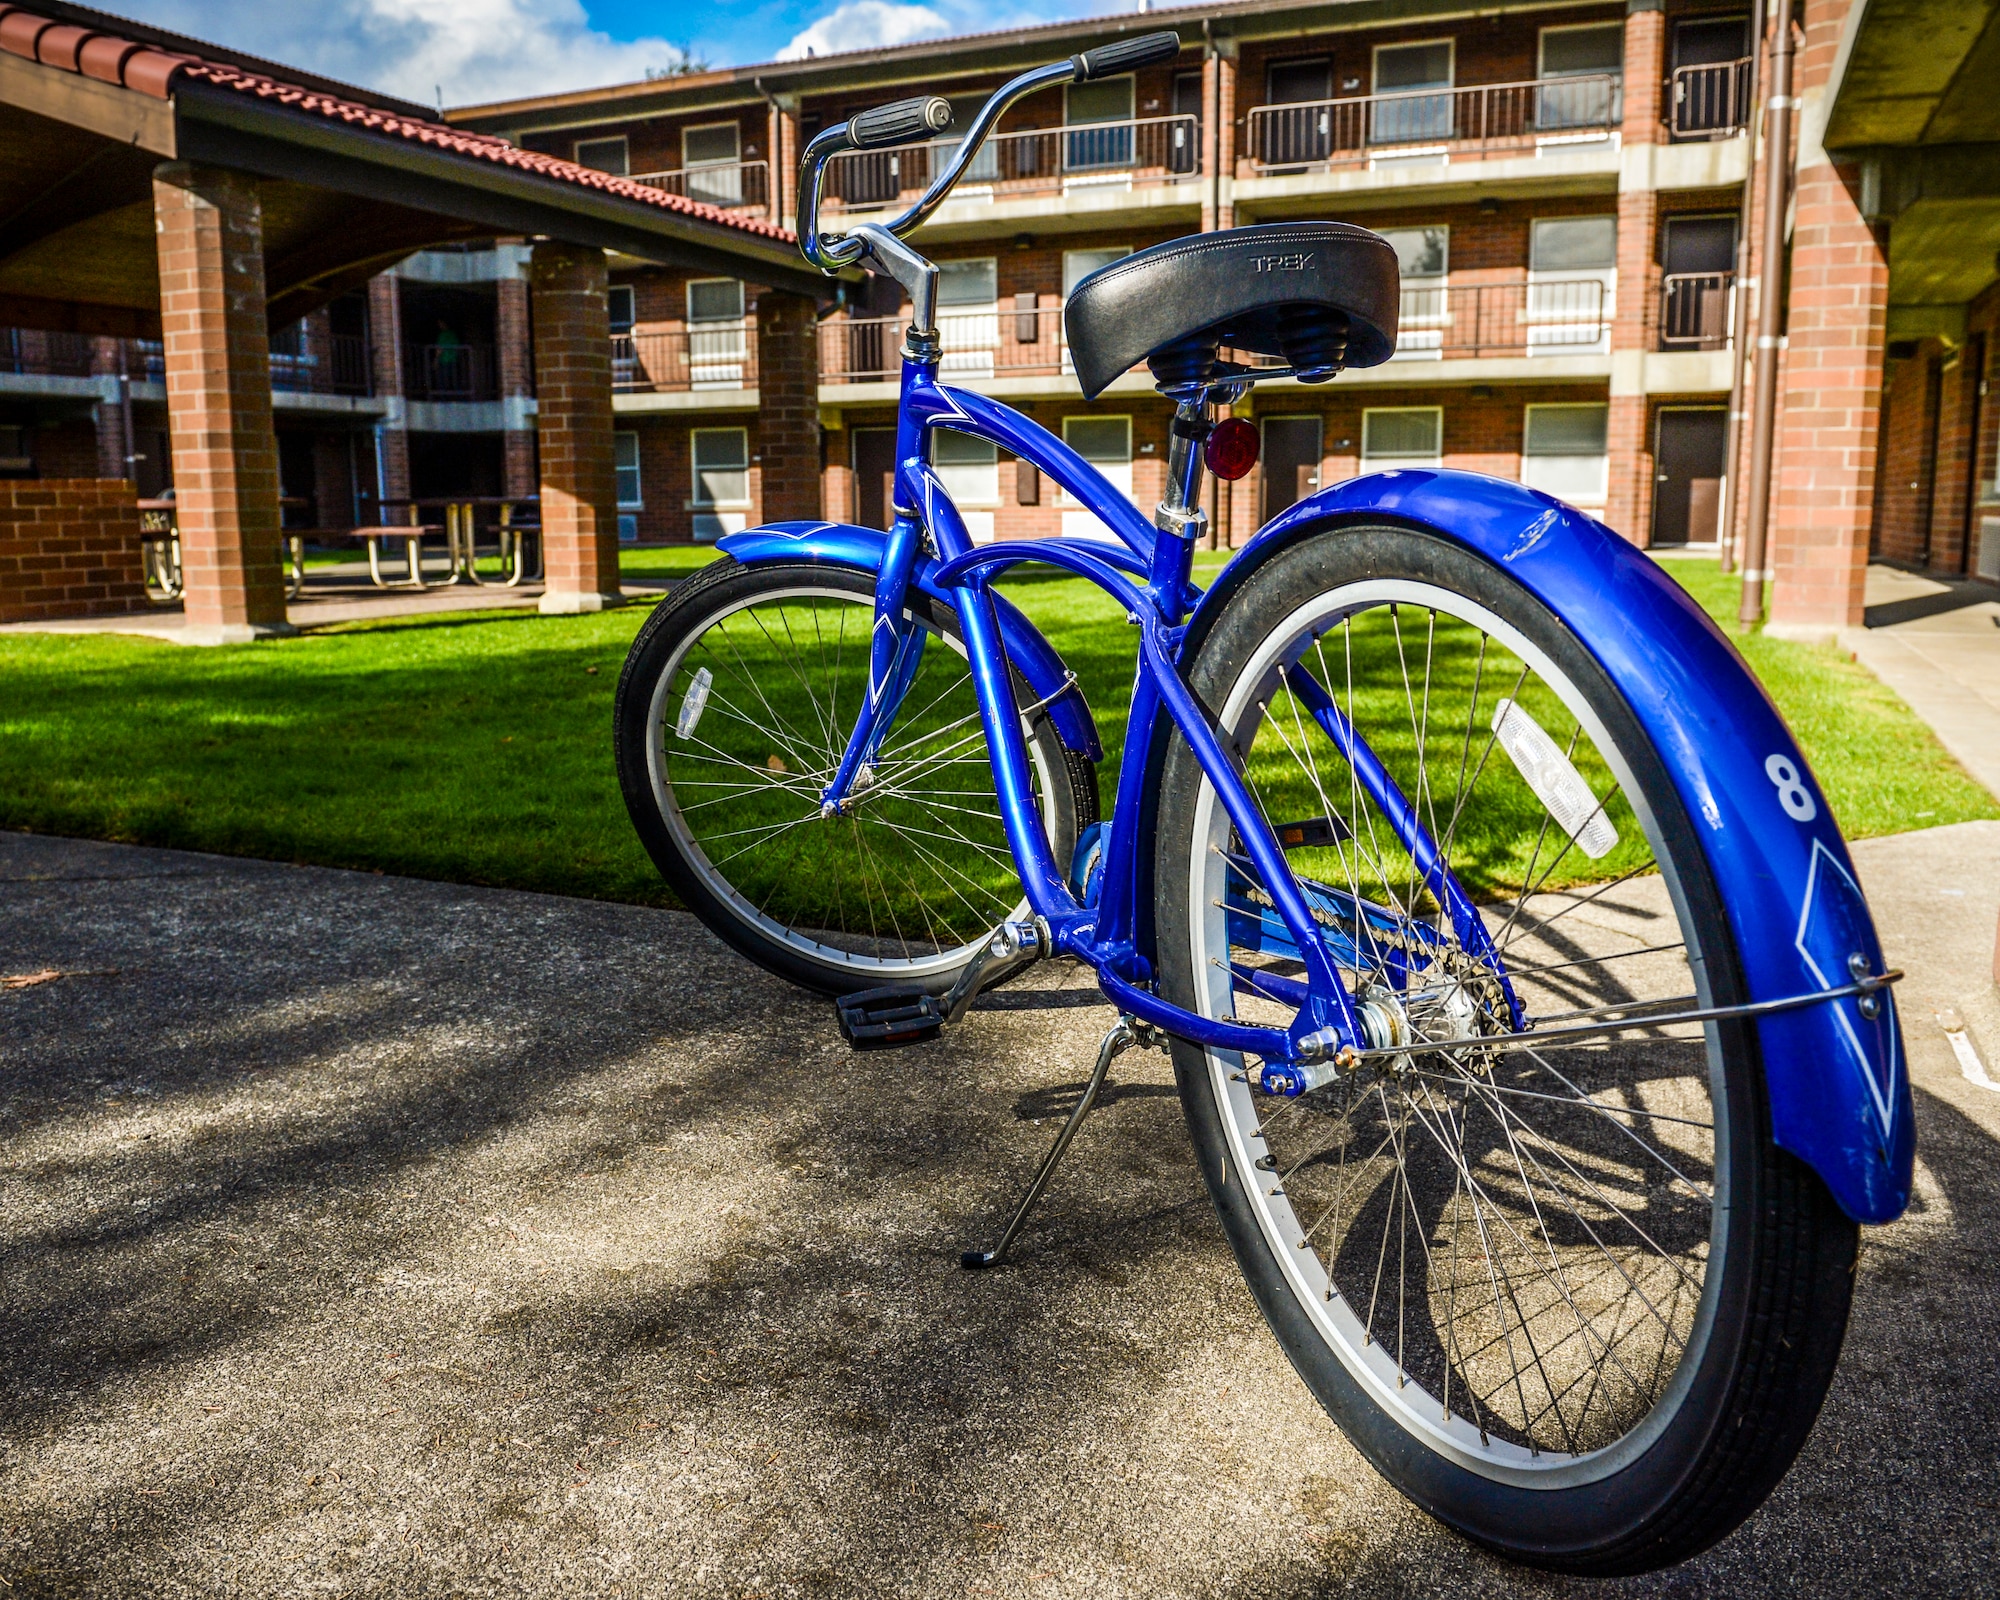 A bicycle is parked in the courtyard of one of the McChord Field dormitories, Oct 23, 2012, at Joint Base Lewis-McChord, Wash. The bicycle is part of the McChord Field bike share program created to help Airmen who do not have vehicles travel around base. (U.S. Air Force photo/Staff Sgt. Sean Tobin)